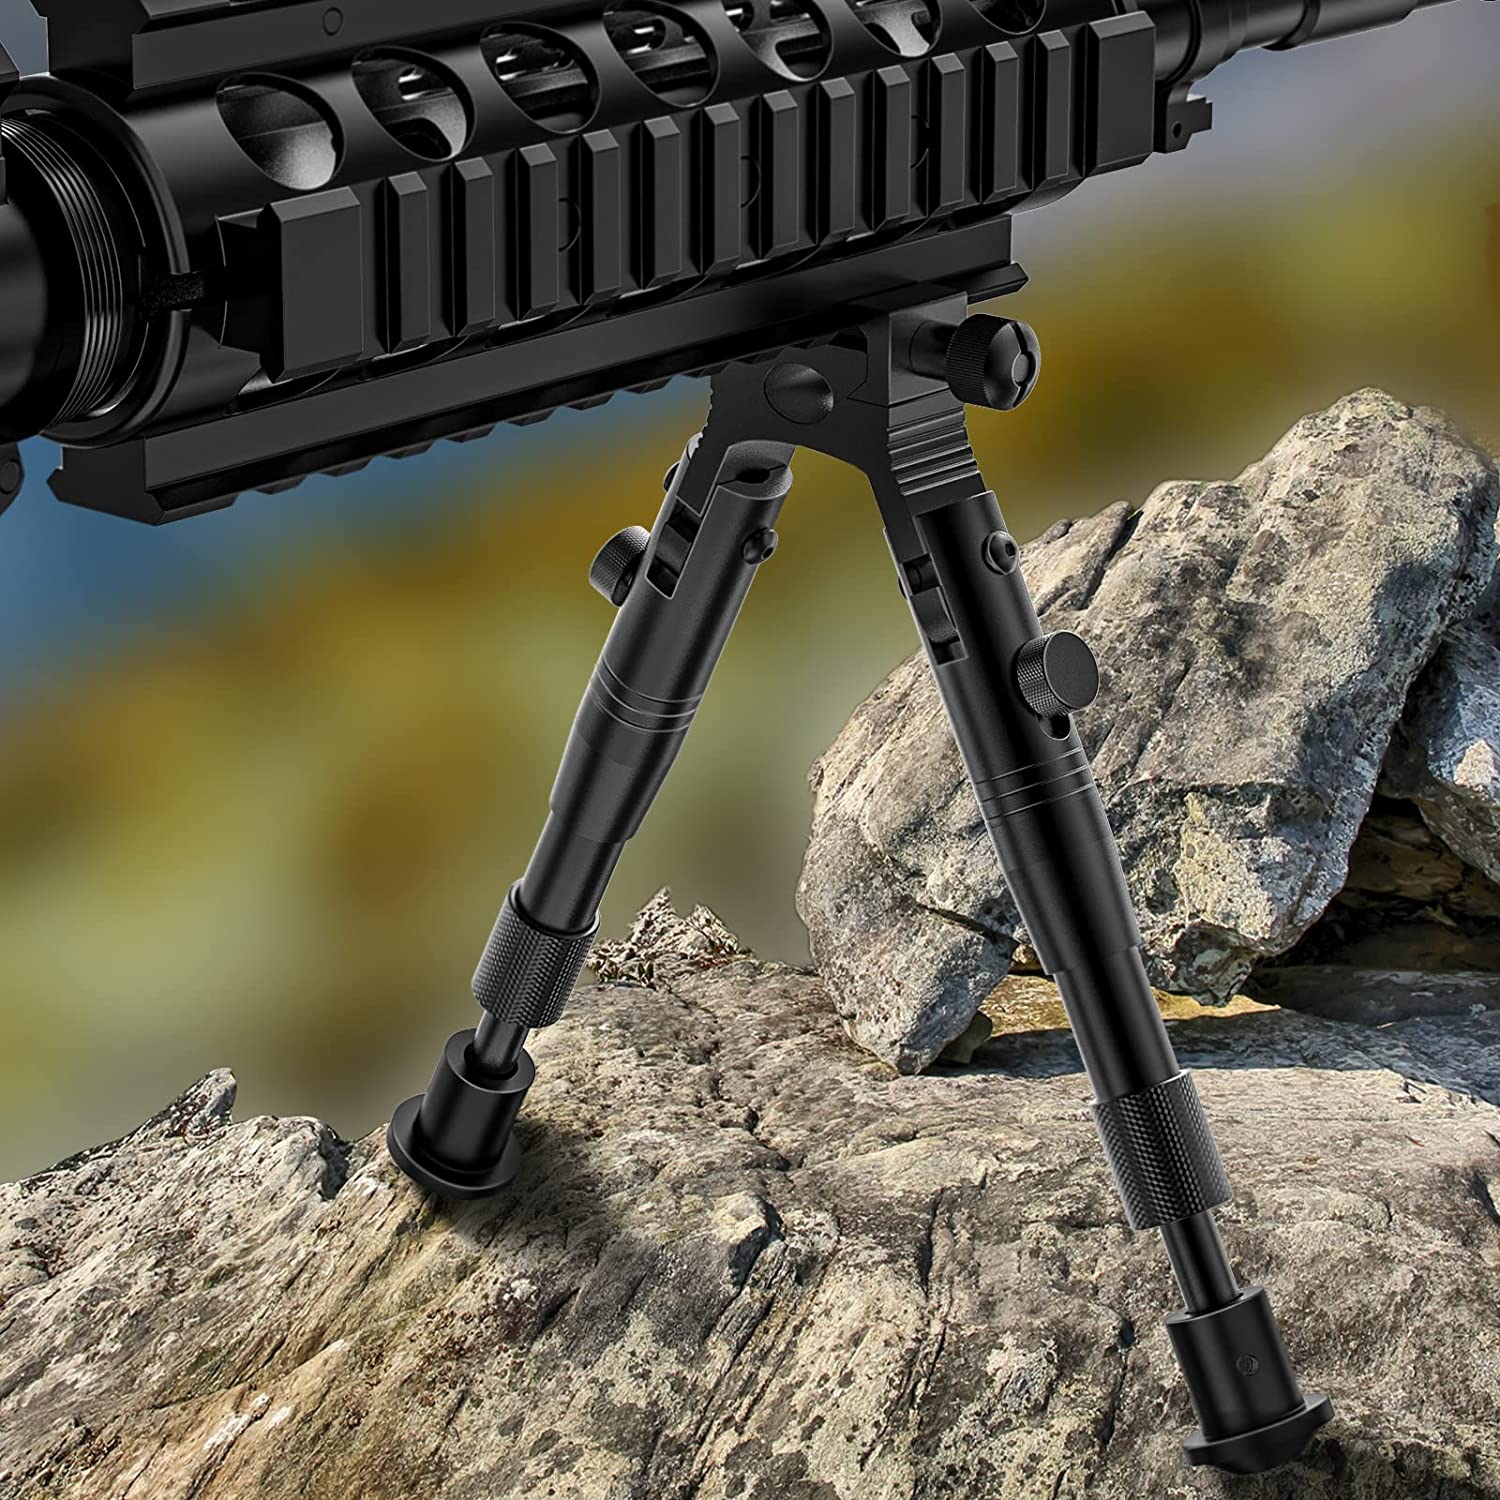 Picatinny Rails Or The M-Lok System?